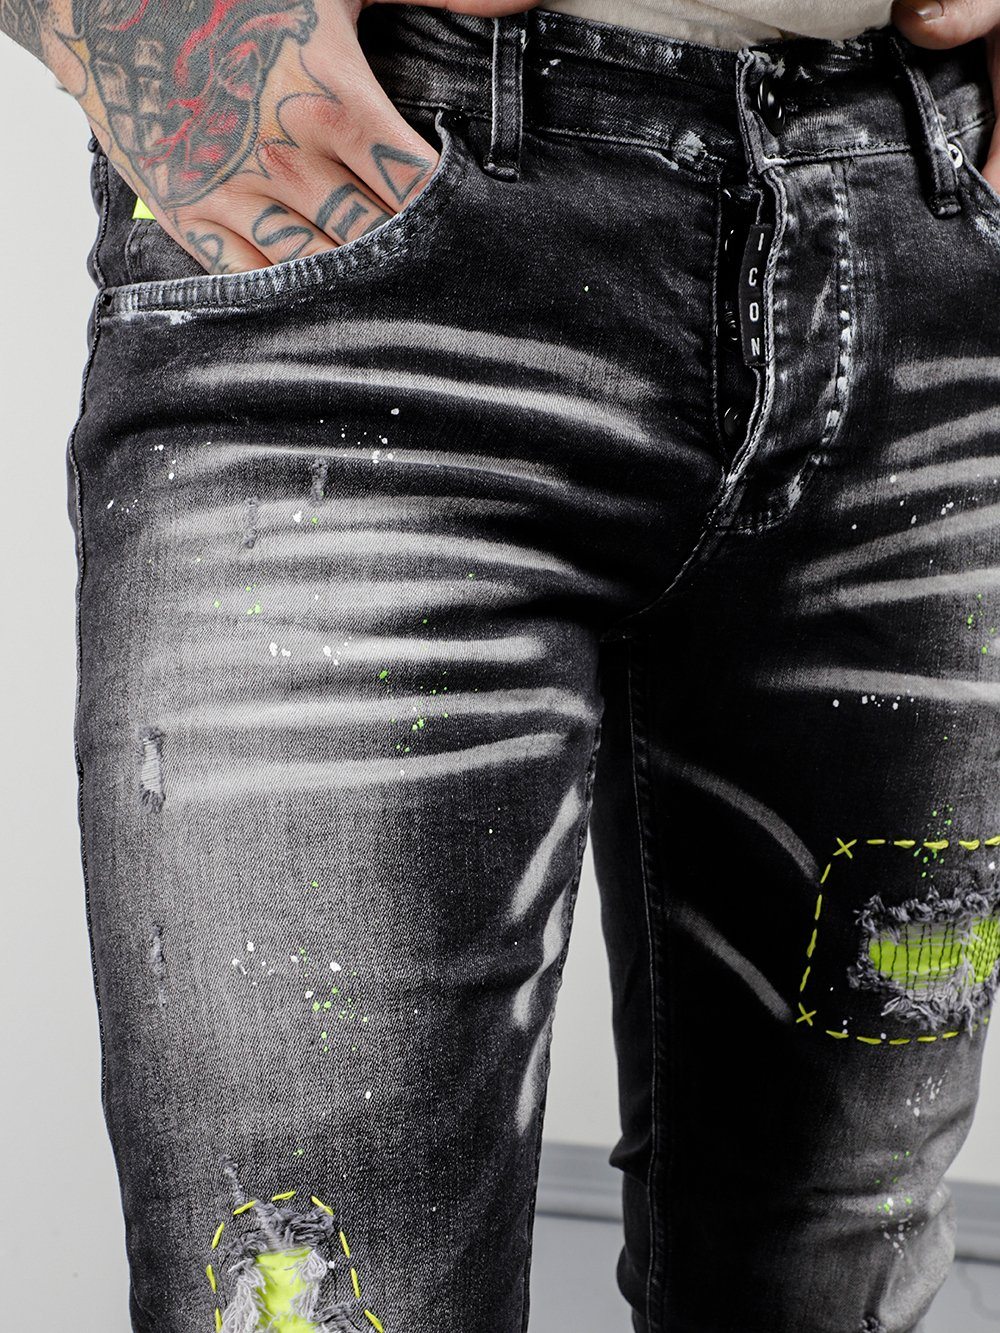 A man wearing a pair of black jeans with NEON TALK paint on them.